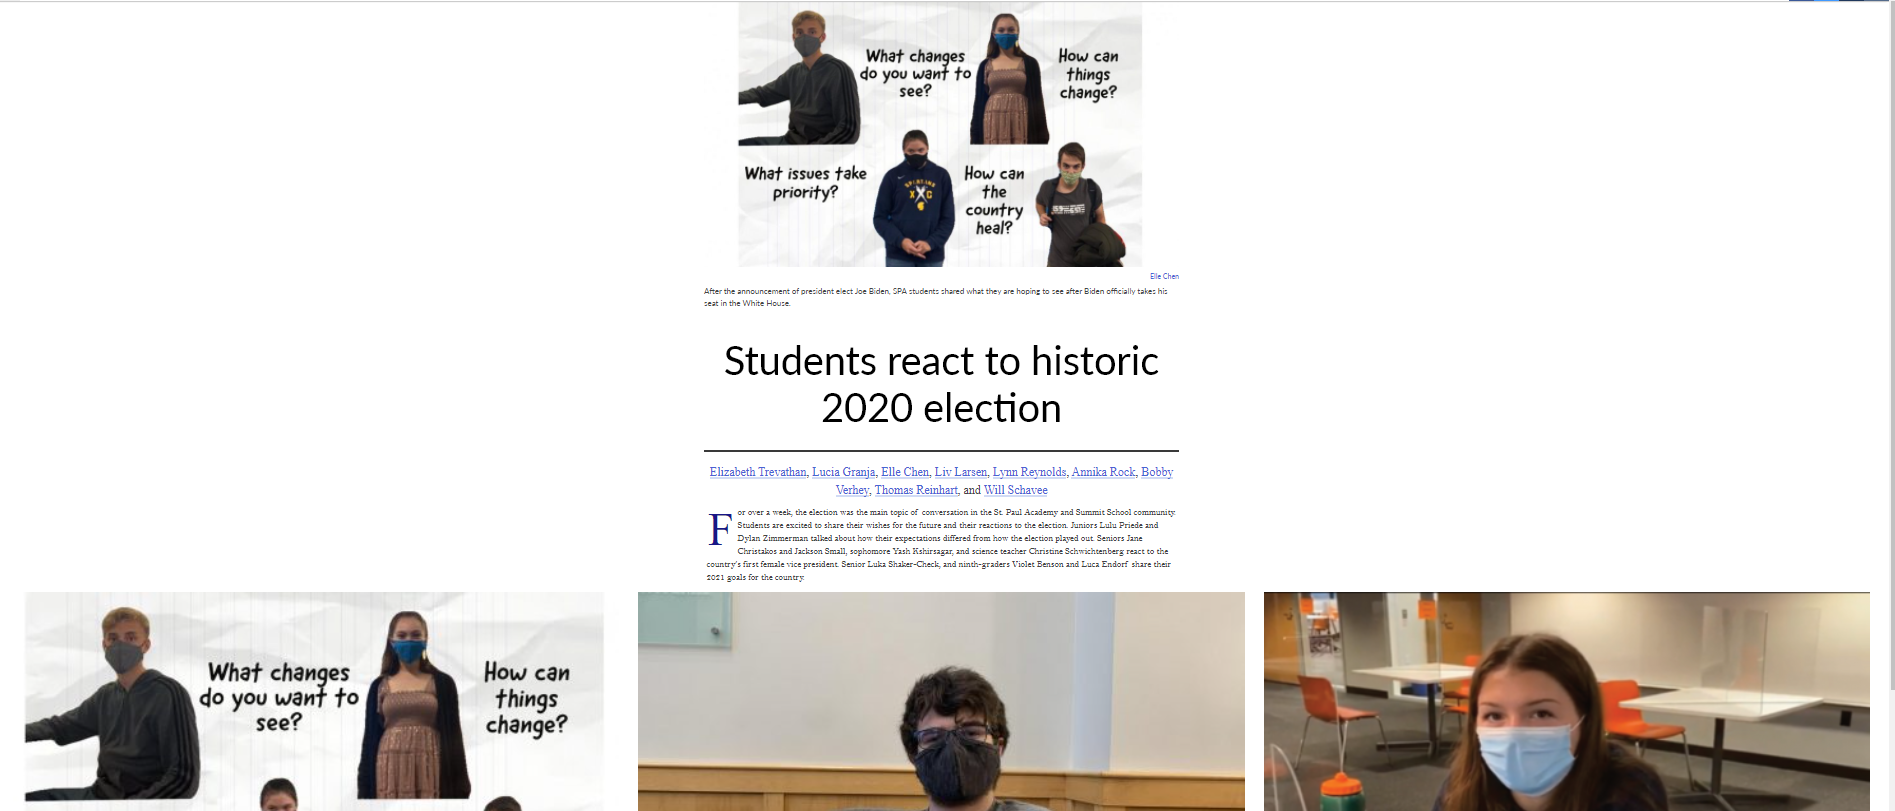 Students react to historic 2020 election